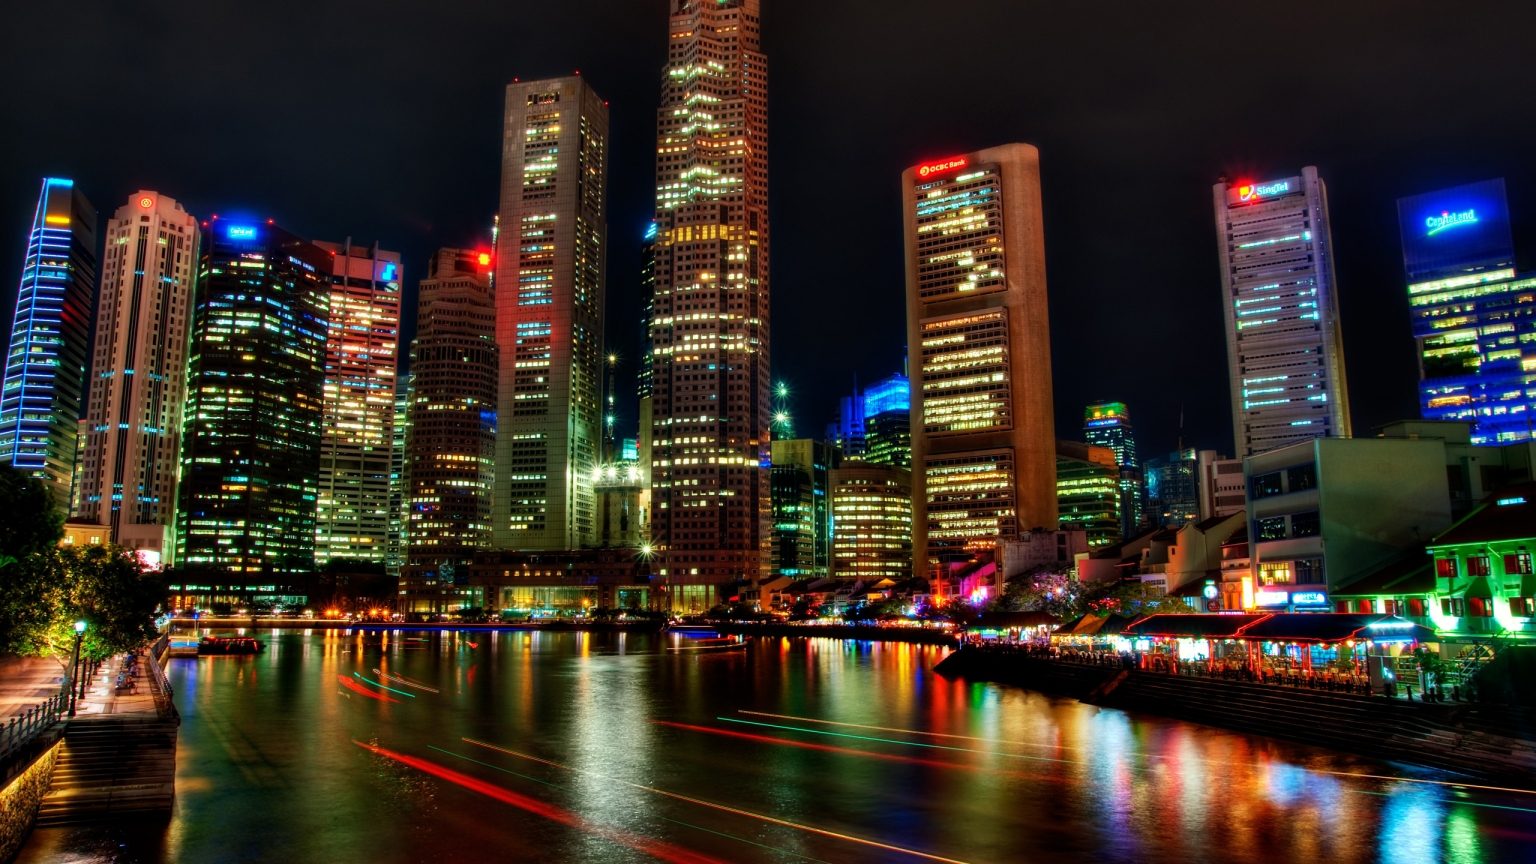 Singapore Night View for 1536 x 864 HDTV resolution